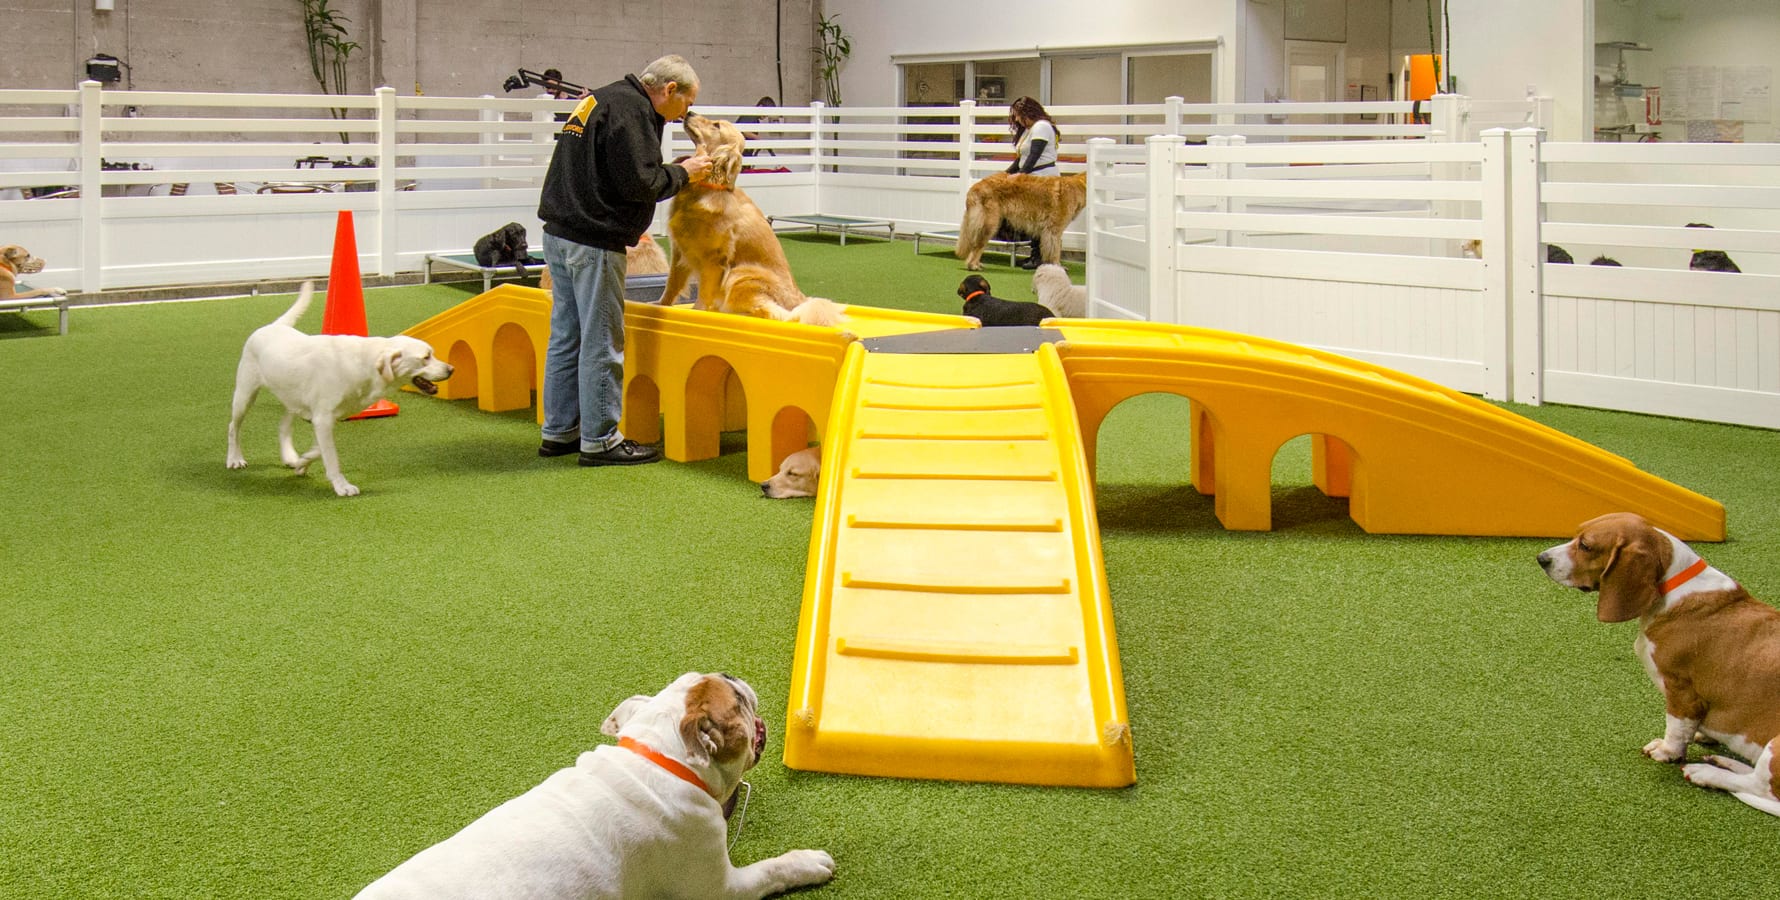 LA Dogworks in Los Angeles, CA implemented the patented K9Grass Flushing System in their 10,000 square foot state-of-the-art facility for dogs.